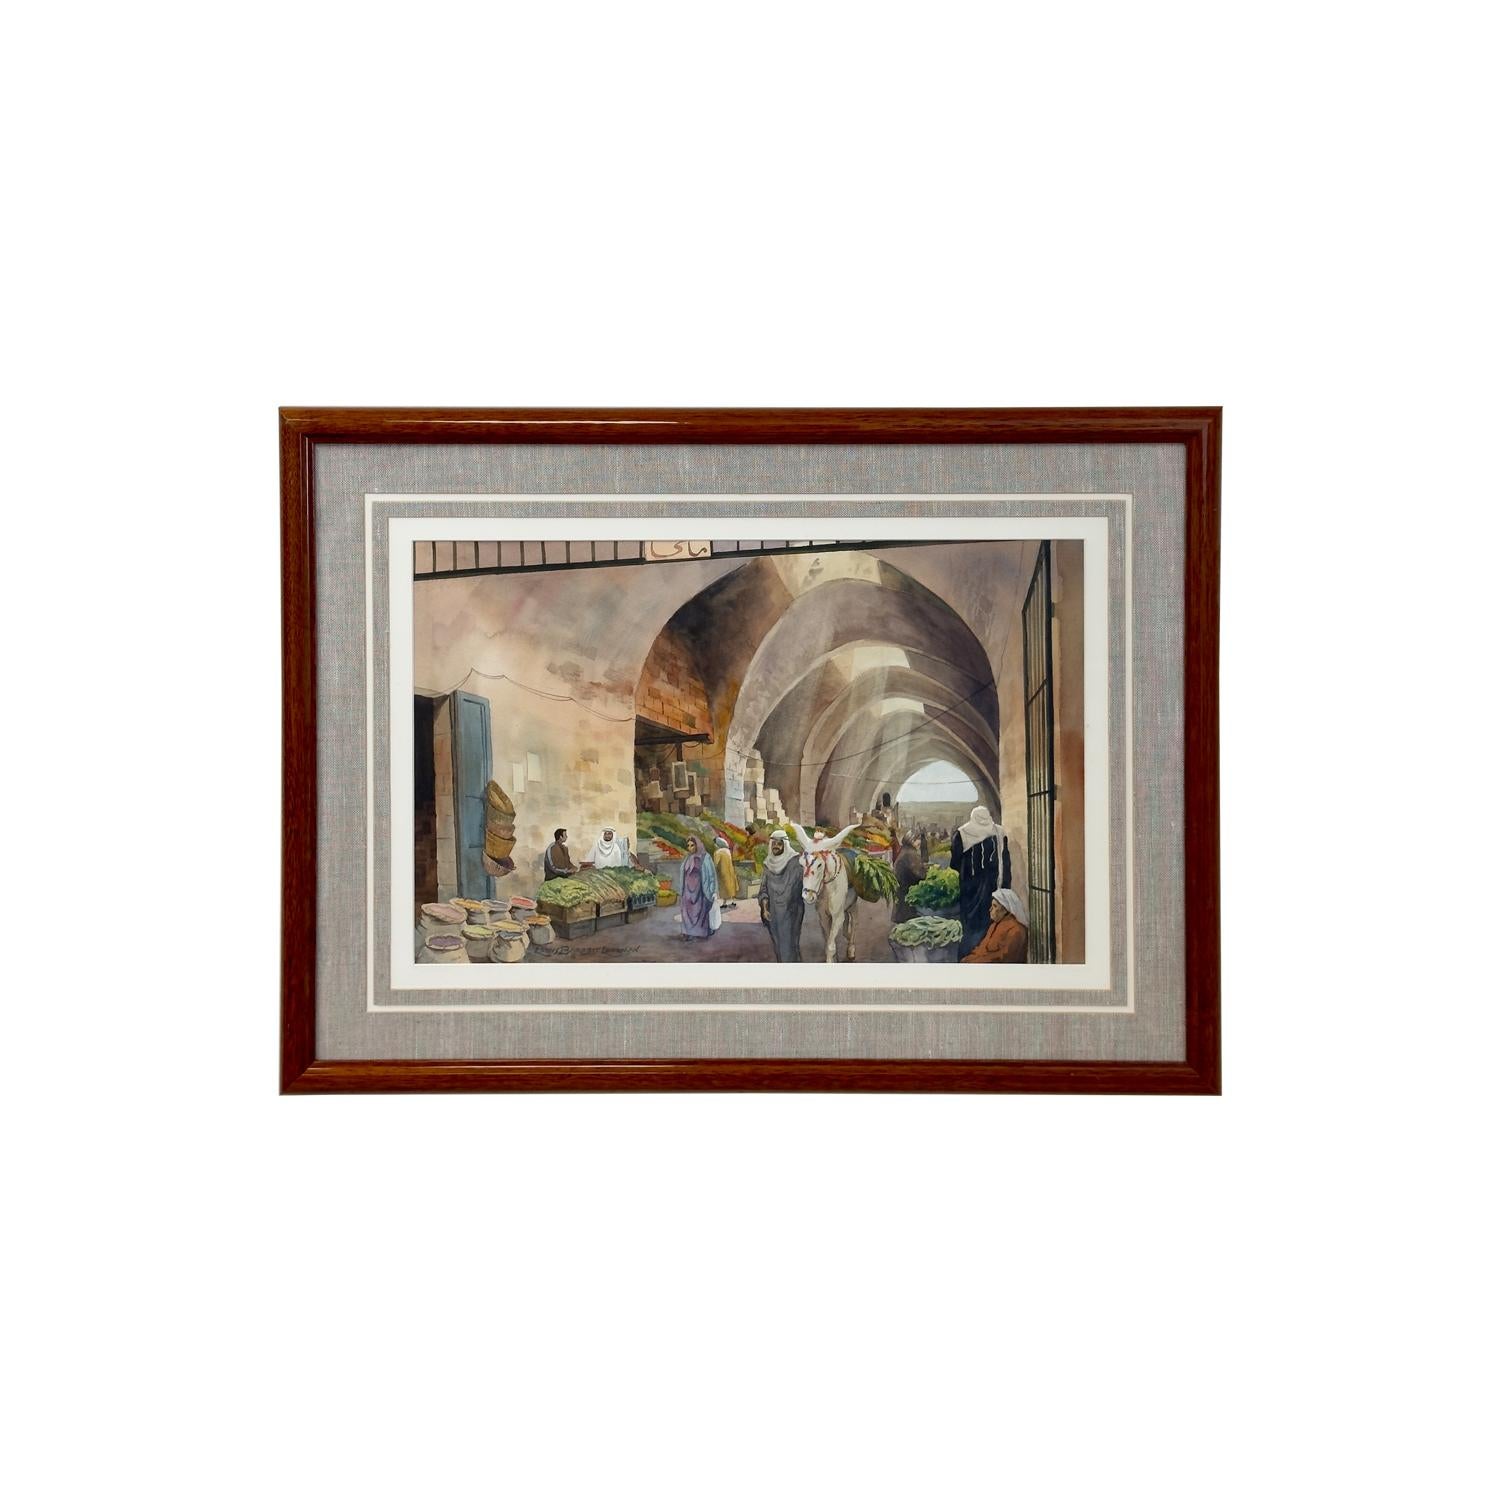 A Lewis Barrett Lehrman's watercolor painting entitled "Market, Old City," one is transported to the heart of a bustling souk nestled within the enigmatic alleys of a Middle Eastern city. Here, amidst the arcs of ancient architecture, the spirit of